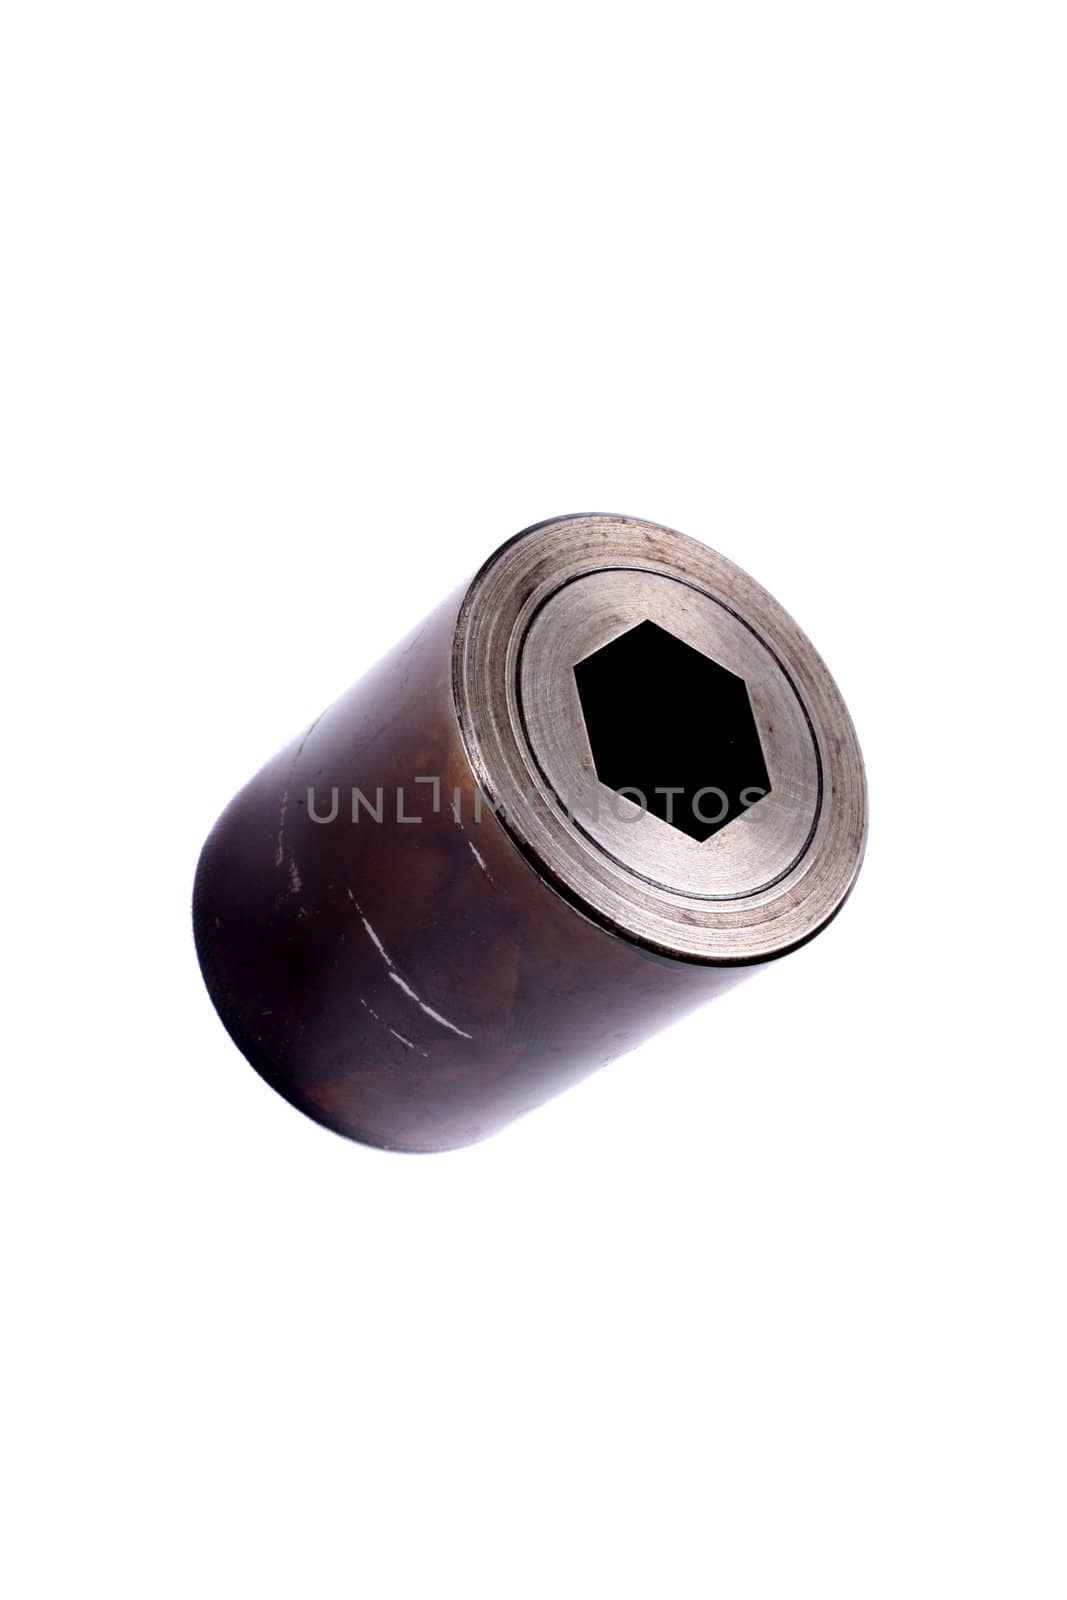 A broach component used in industrial machines or vehicles, on white studio background.